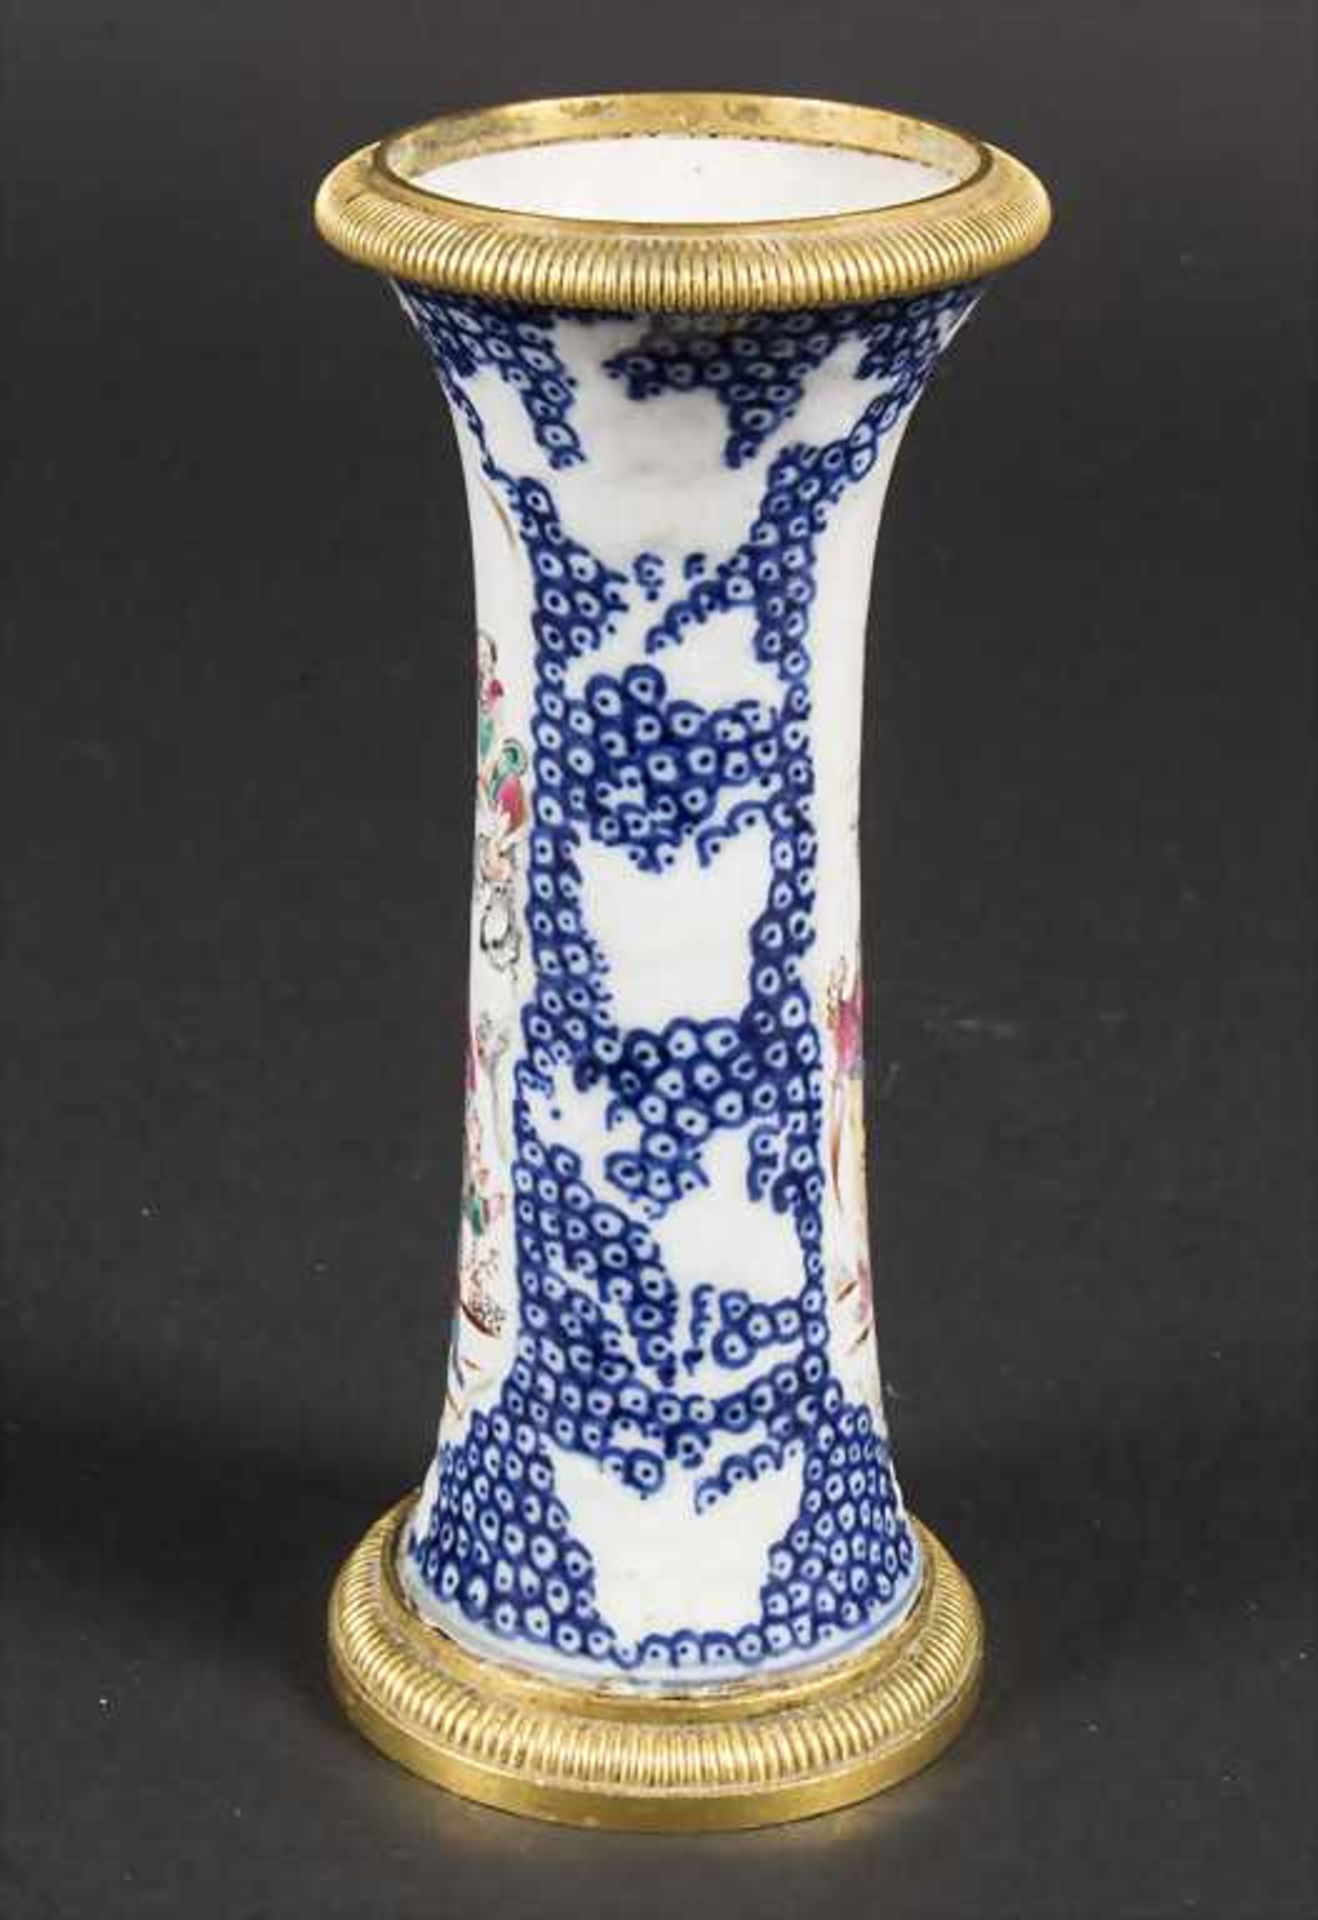 Ziervase / A decorative porcelain vase, China, Qing Dynastie (1644-1911), 18. Jh.Mater - Image 3 of 9